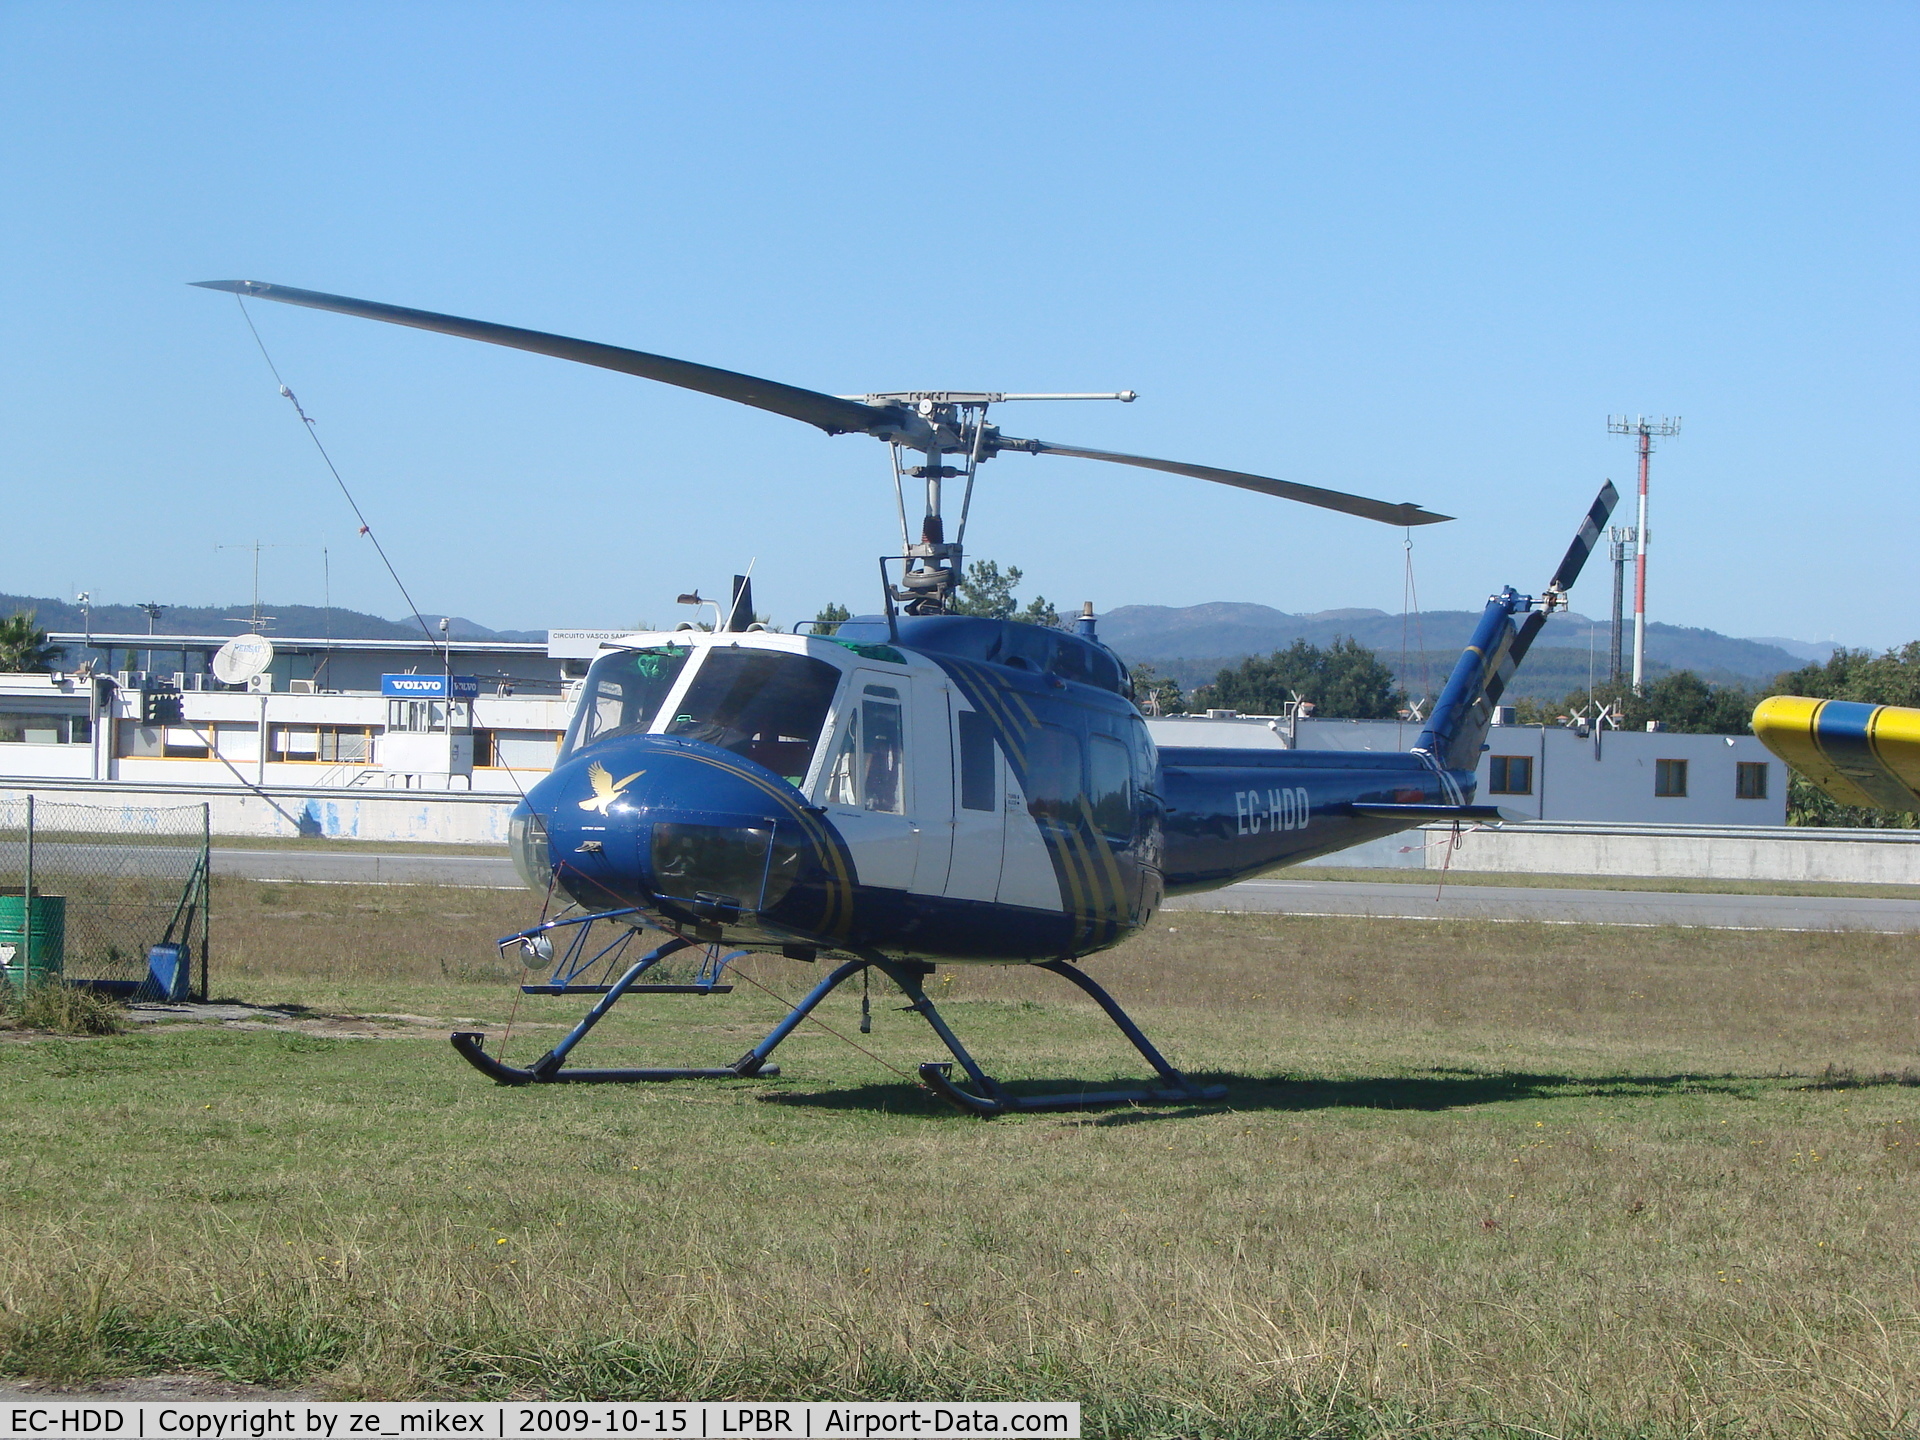 EC-HDD, 1973 Bell UH-1H Iroquois C/N 13551, Bell 205 of AERONORTE company,based at Braga